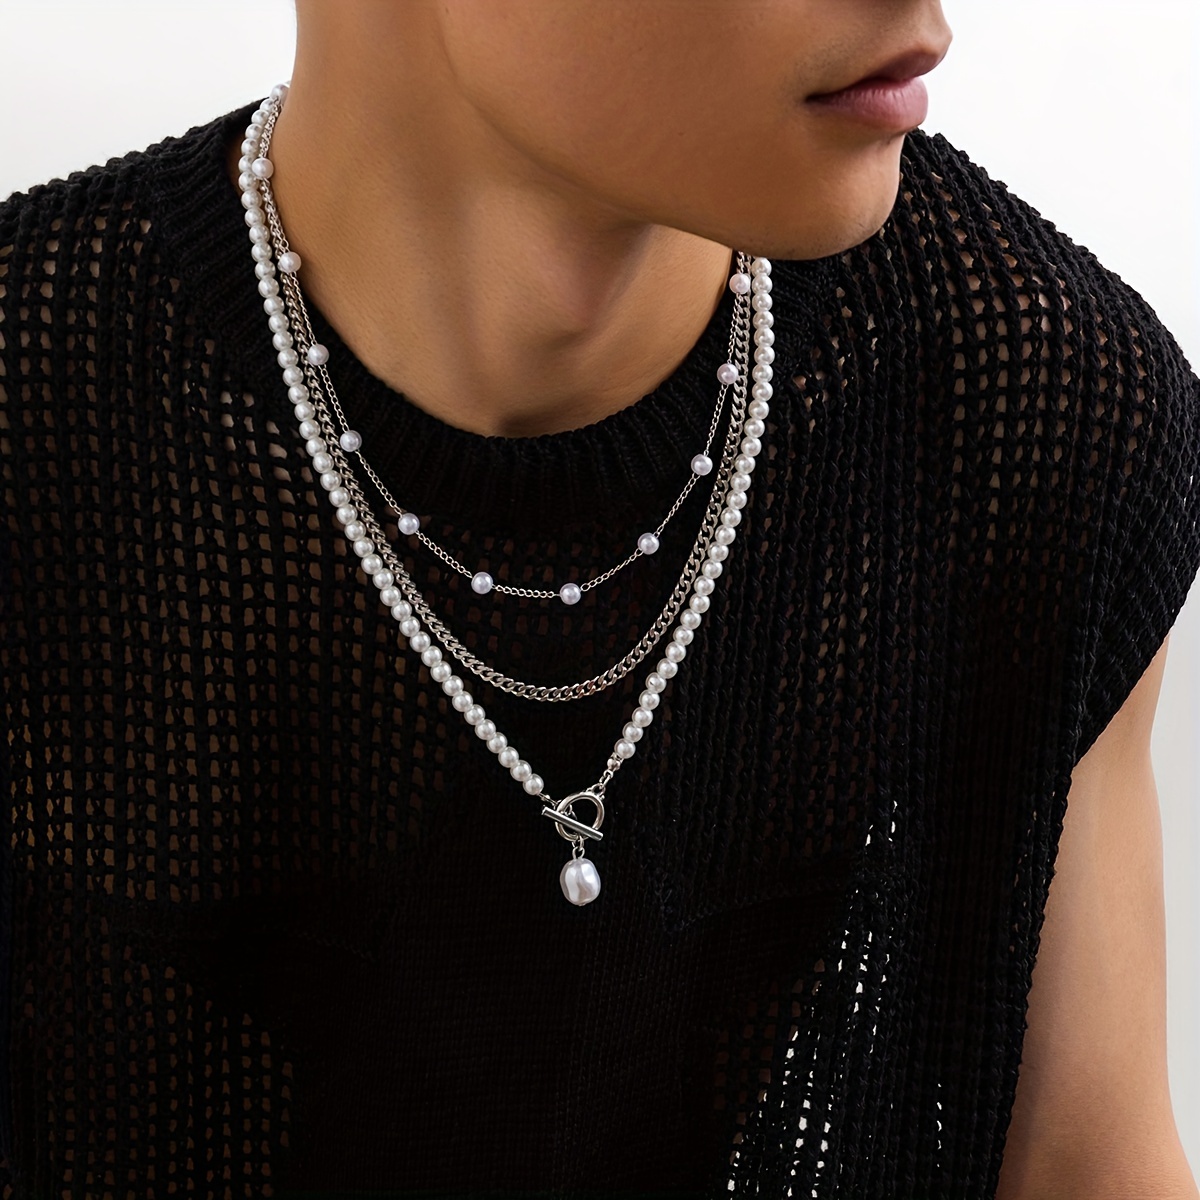 Fashionable and Popular 2pcs Men Faux Pearl Beaded Necklace Stainless Steel  for Jewelry Gift and for a Stylish Look